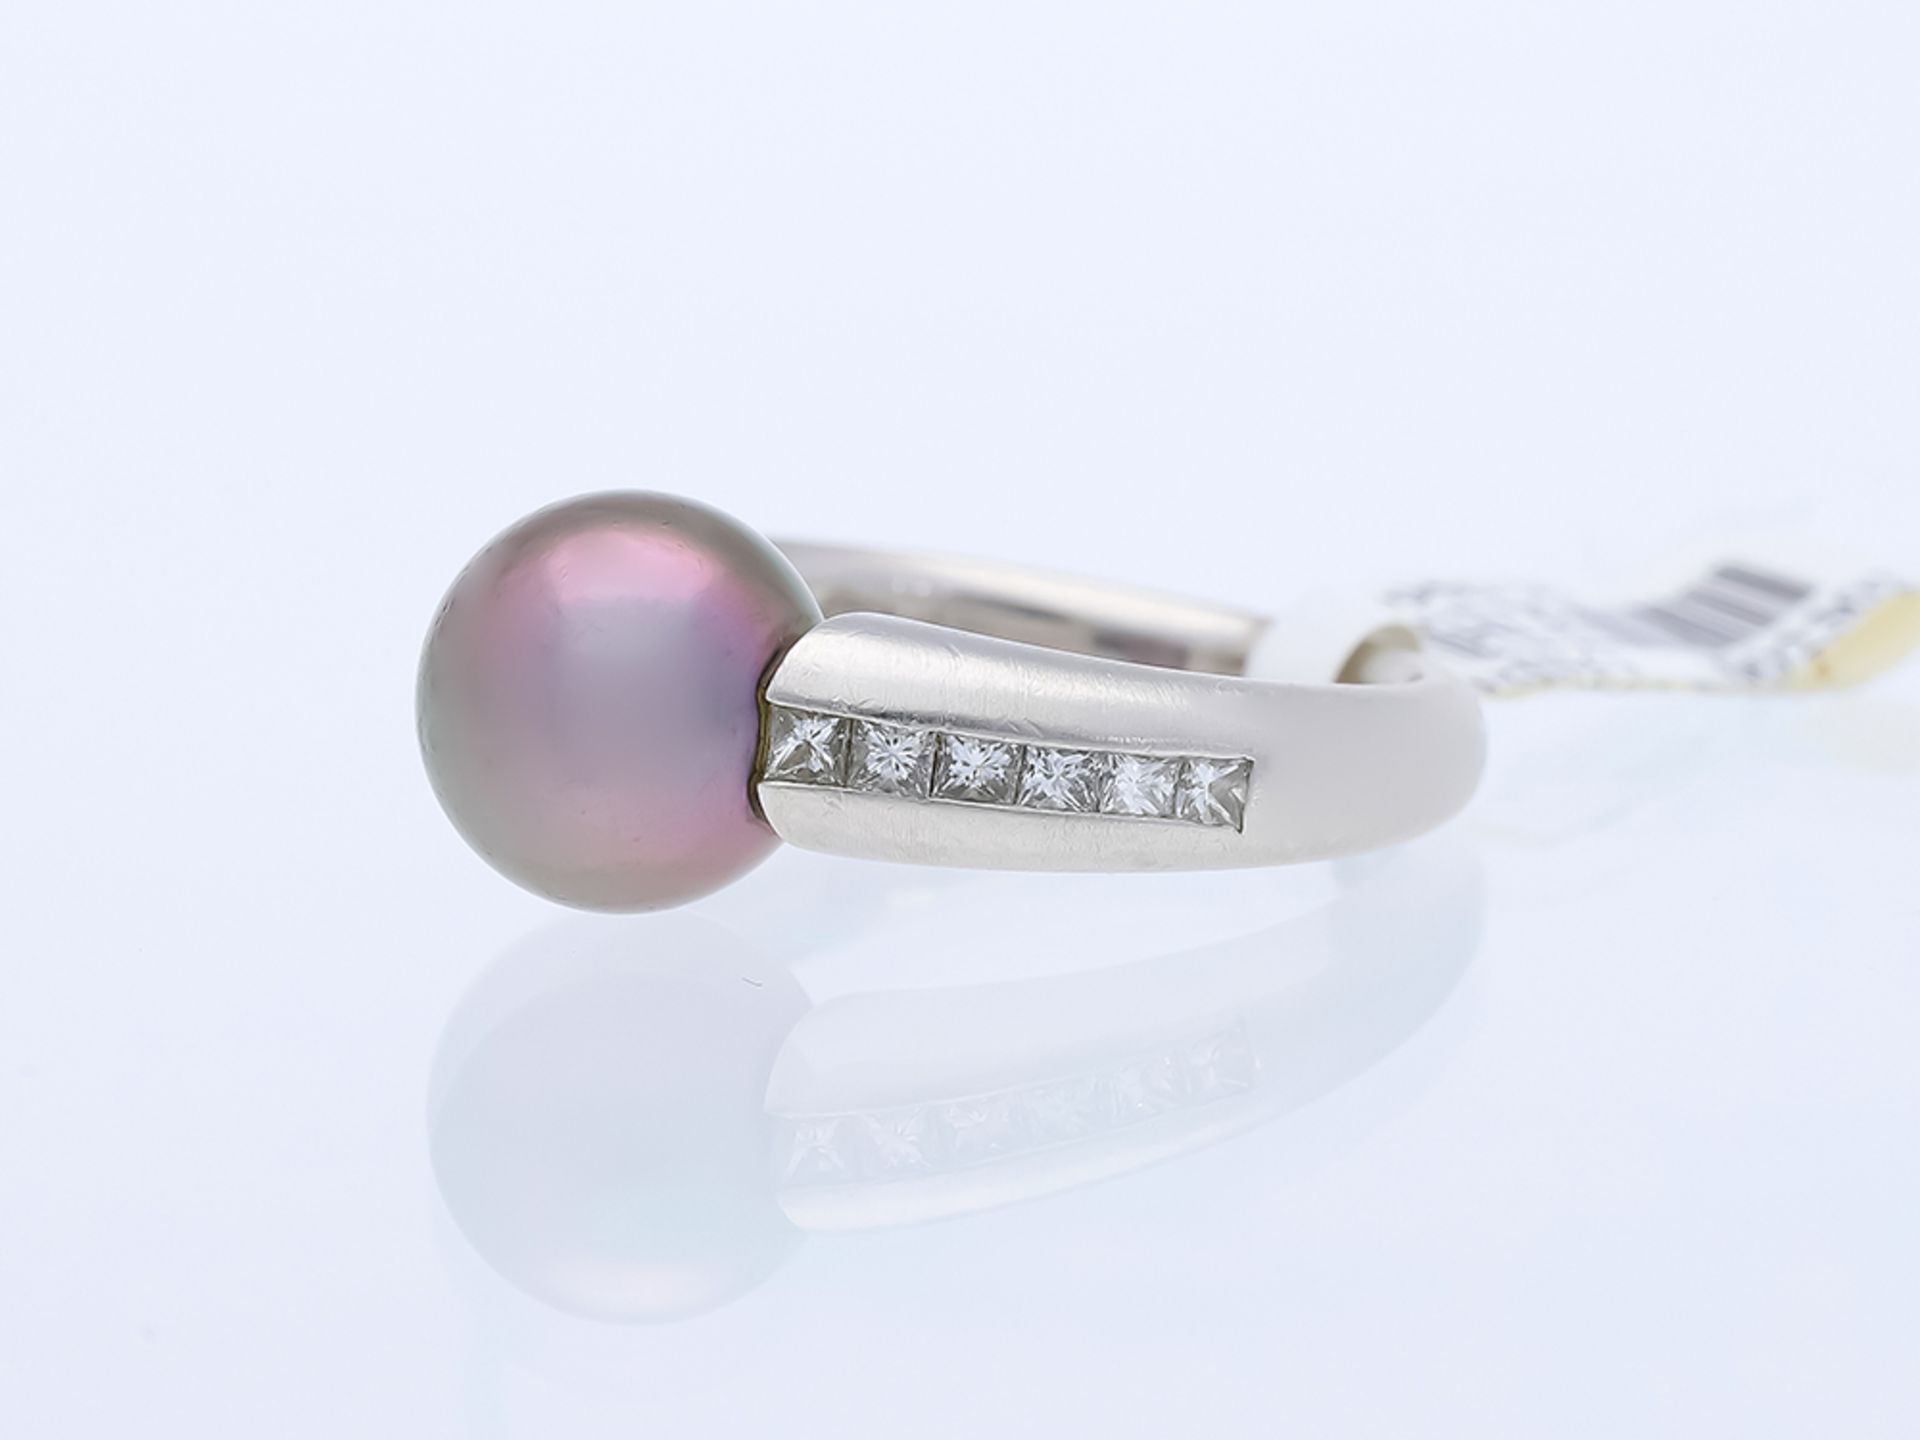 Ring with Tahitian cultured pearl and diamonds in 950 platinum, signed "BUNDA" - Image 2 of 6